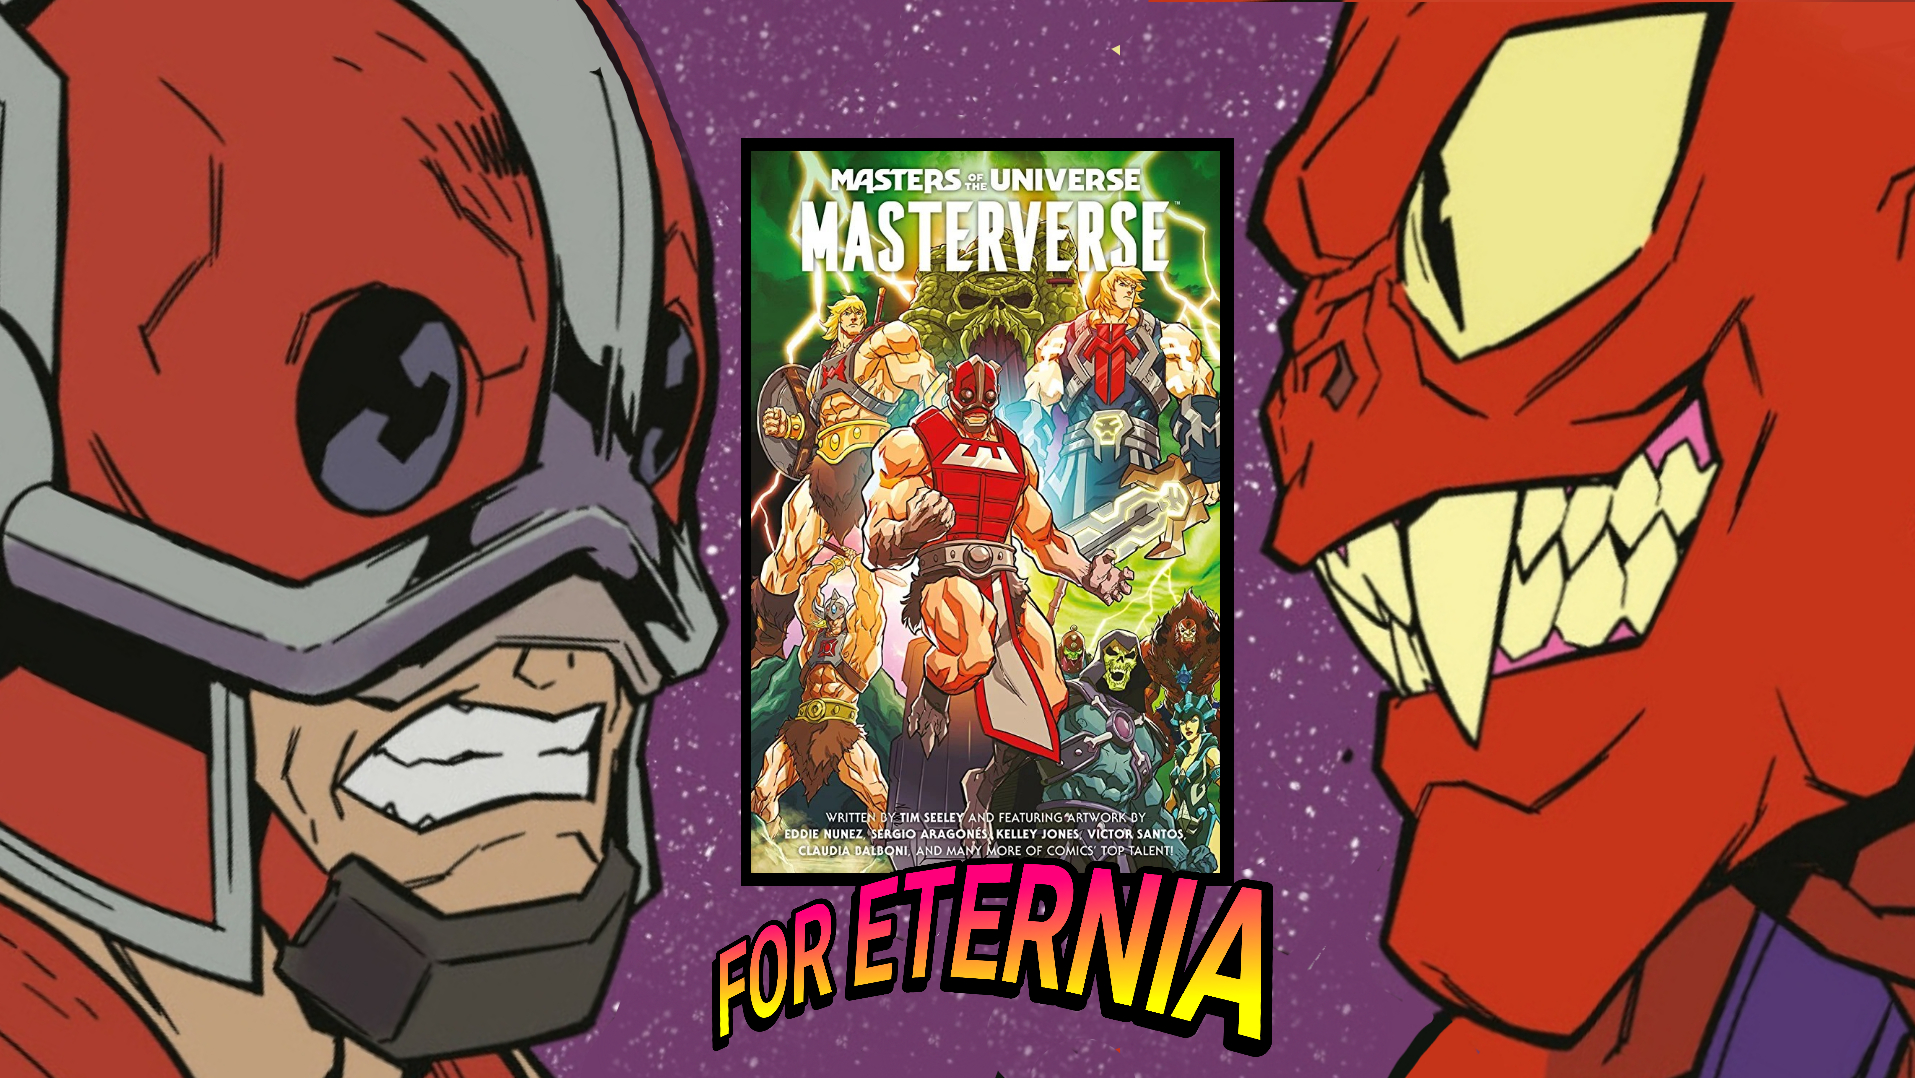 ”Masters of the Universe: Masterverse Volume 1” trade paperback is out today!